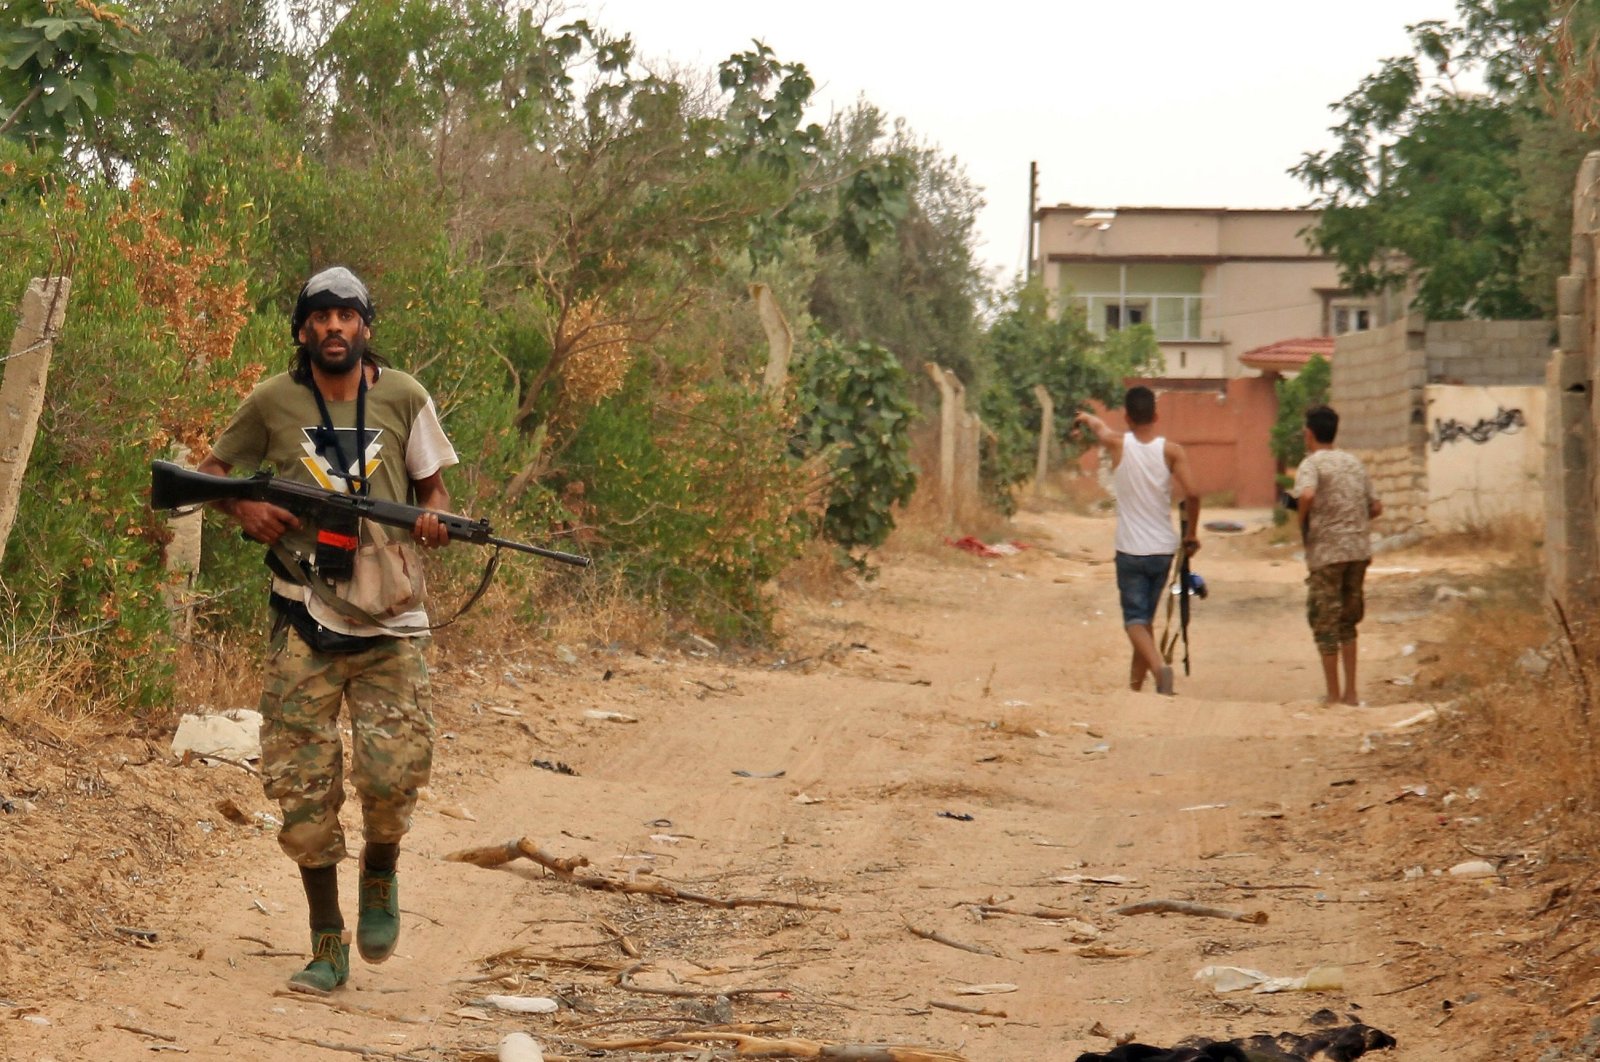 Fighters loyal to the internationally recognised Libyan Government of National Accord (GNA) are pictured during clashes with forces loyal to Khalifa Haftar in an area south of the Libyan capital Tripoli on June 1, 2020. (AFP Photo)